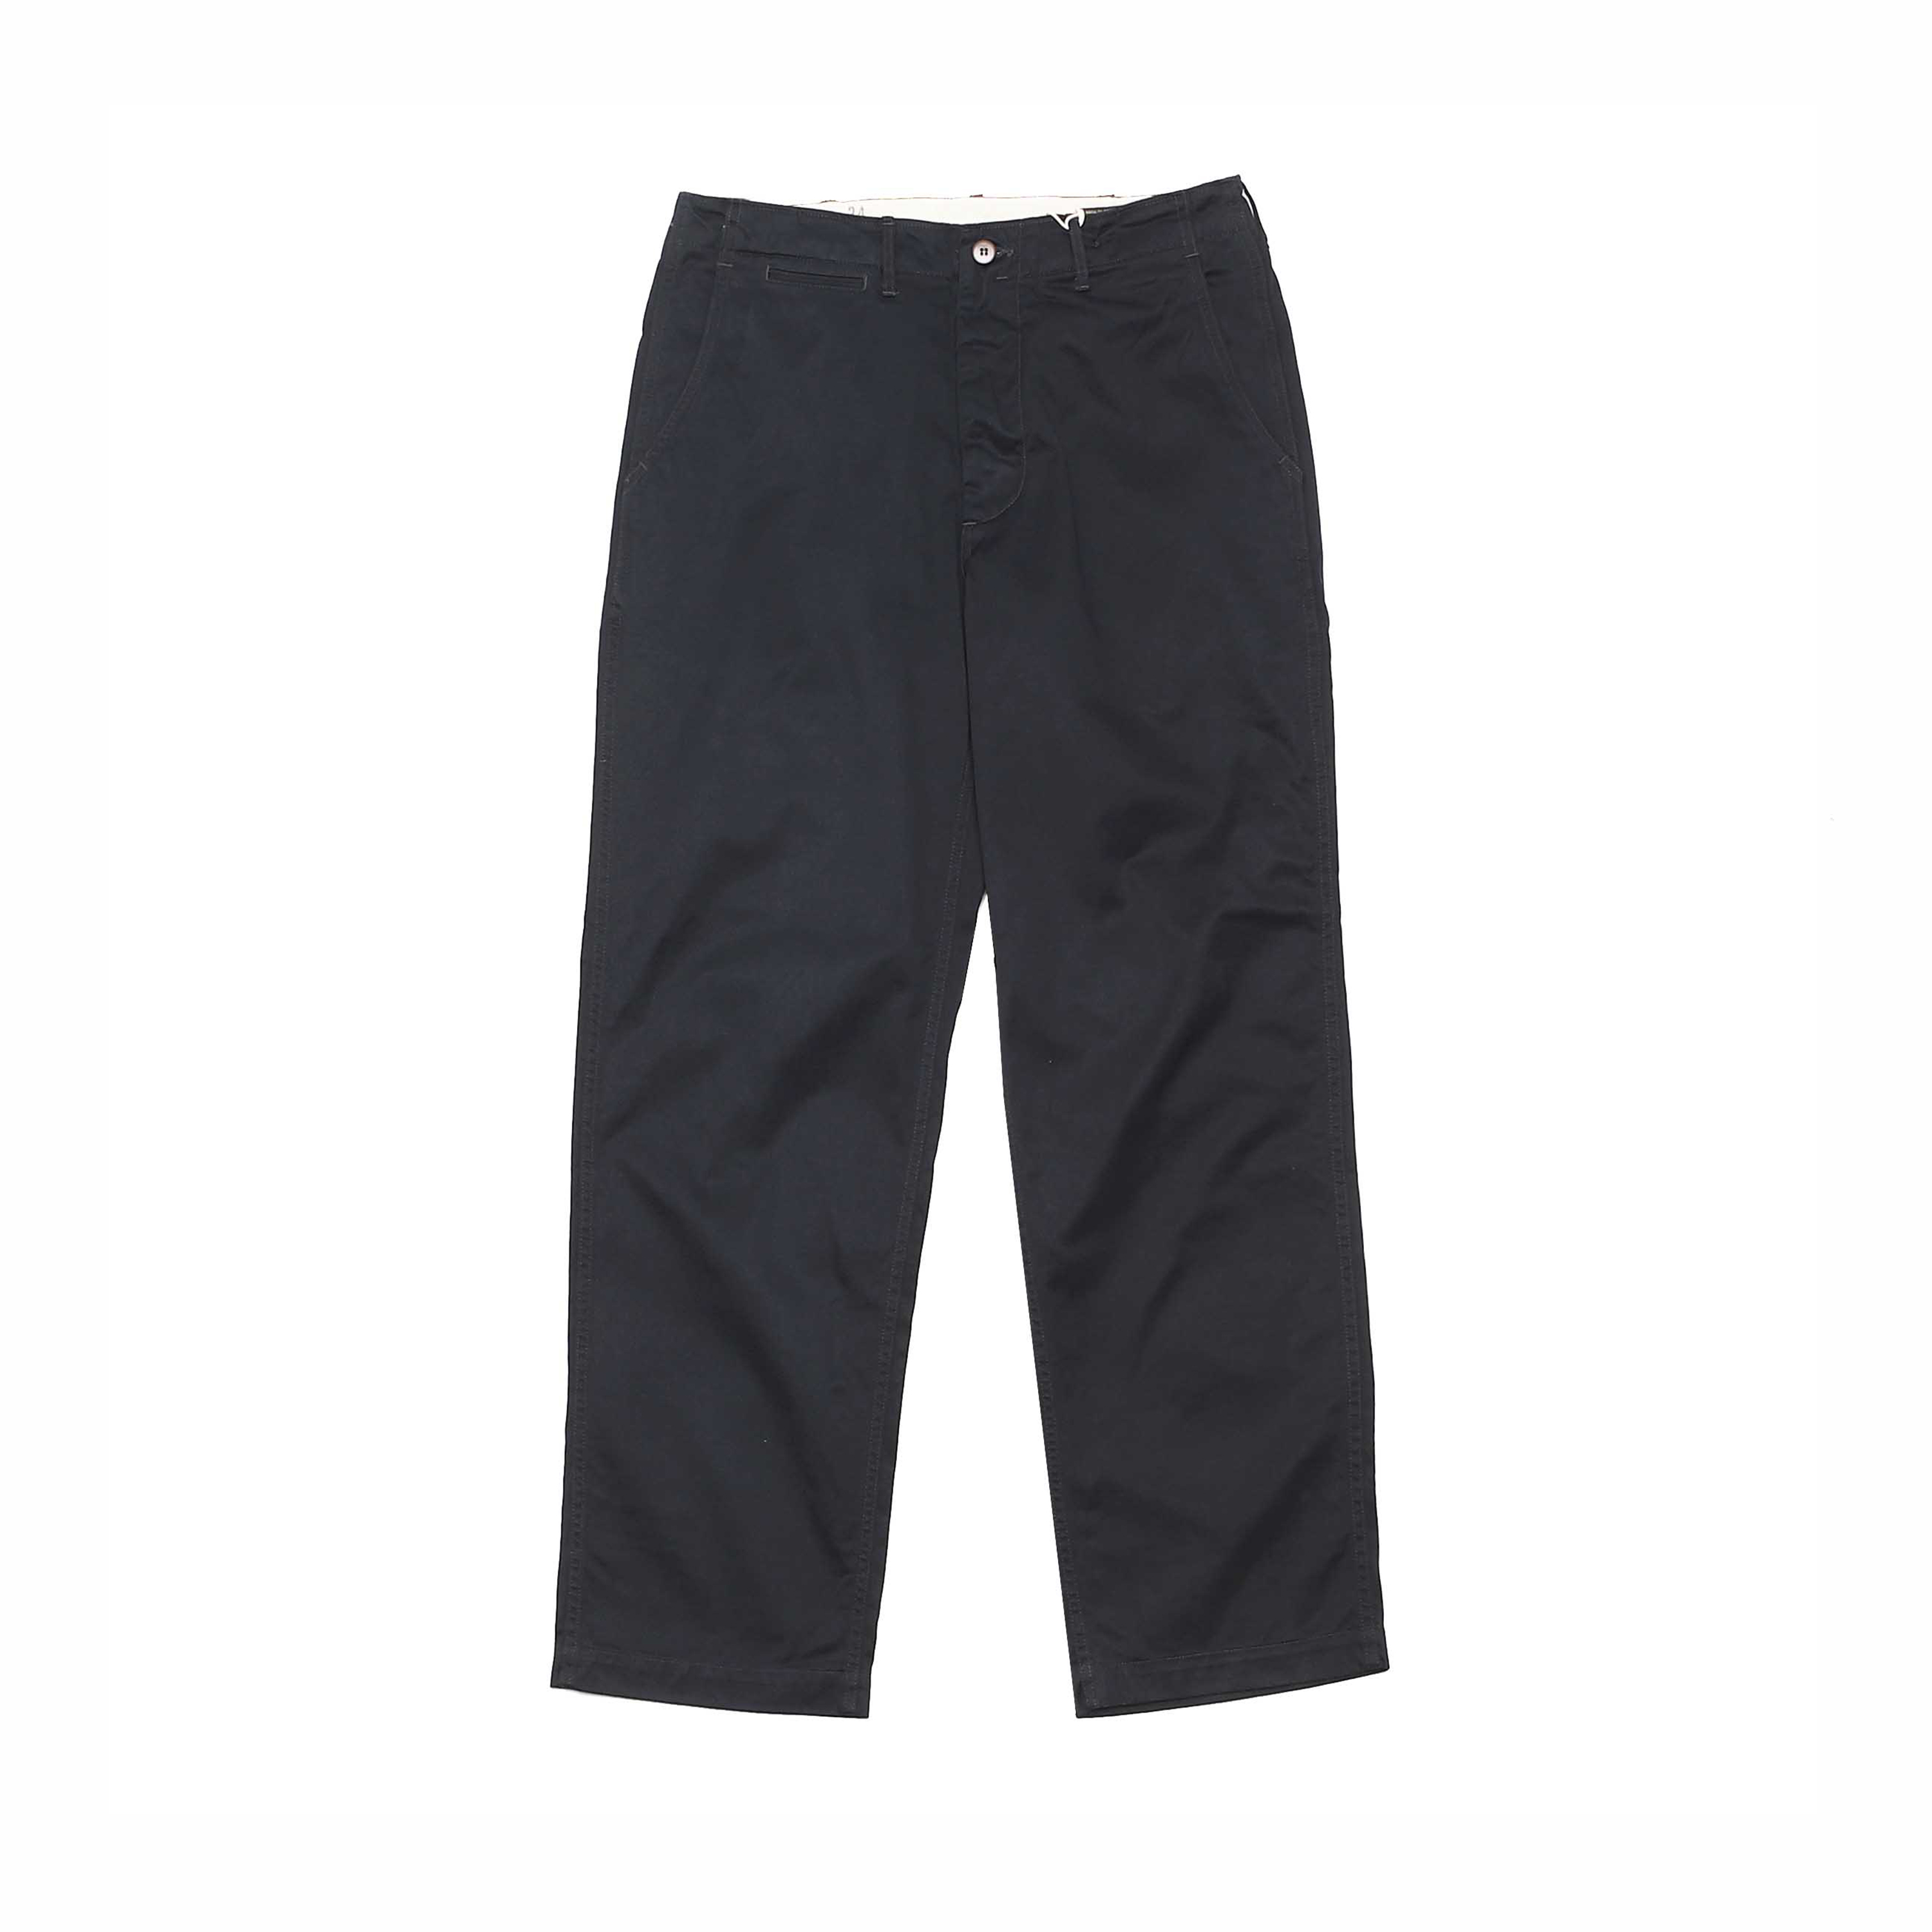 OVERLAND CAMPAIGN TROUSERS(ZY-0210) - DARK NAVY